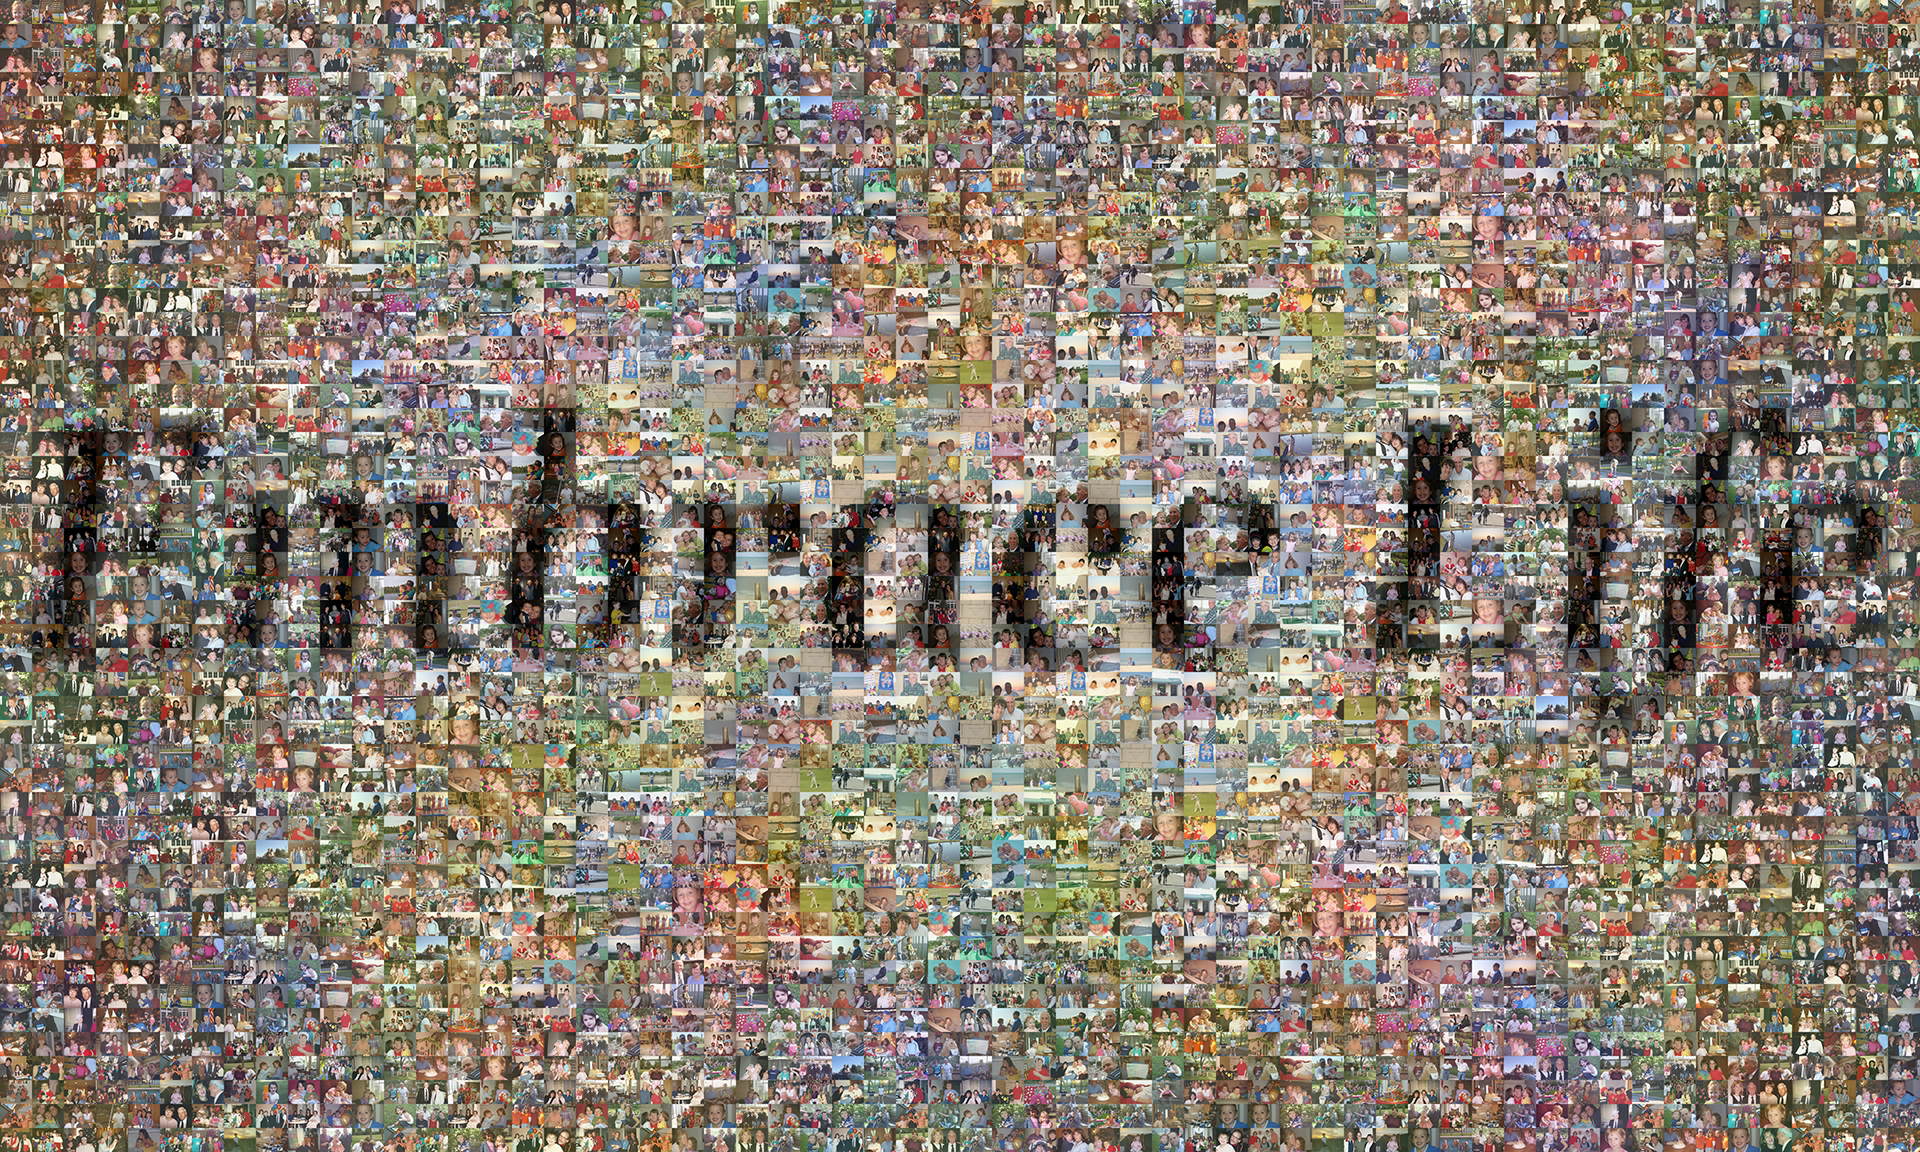 photo mosaic created using 344 customer submitted photos